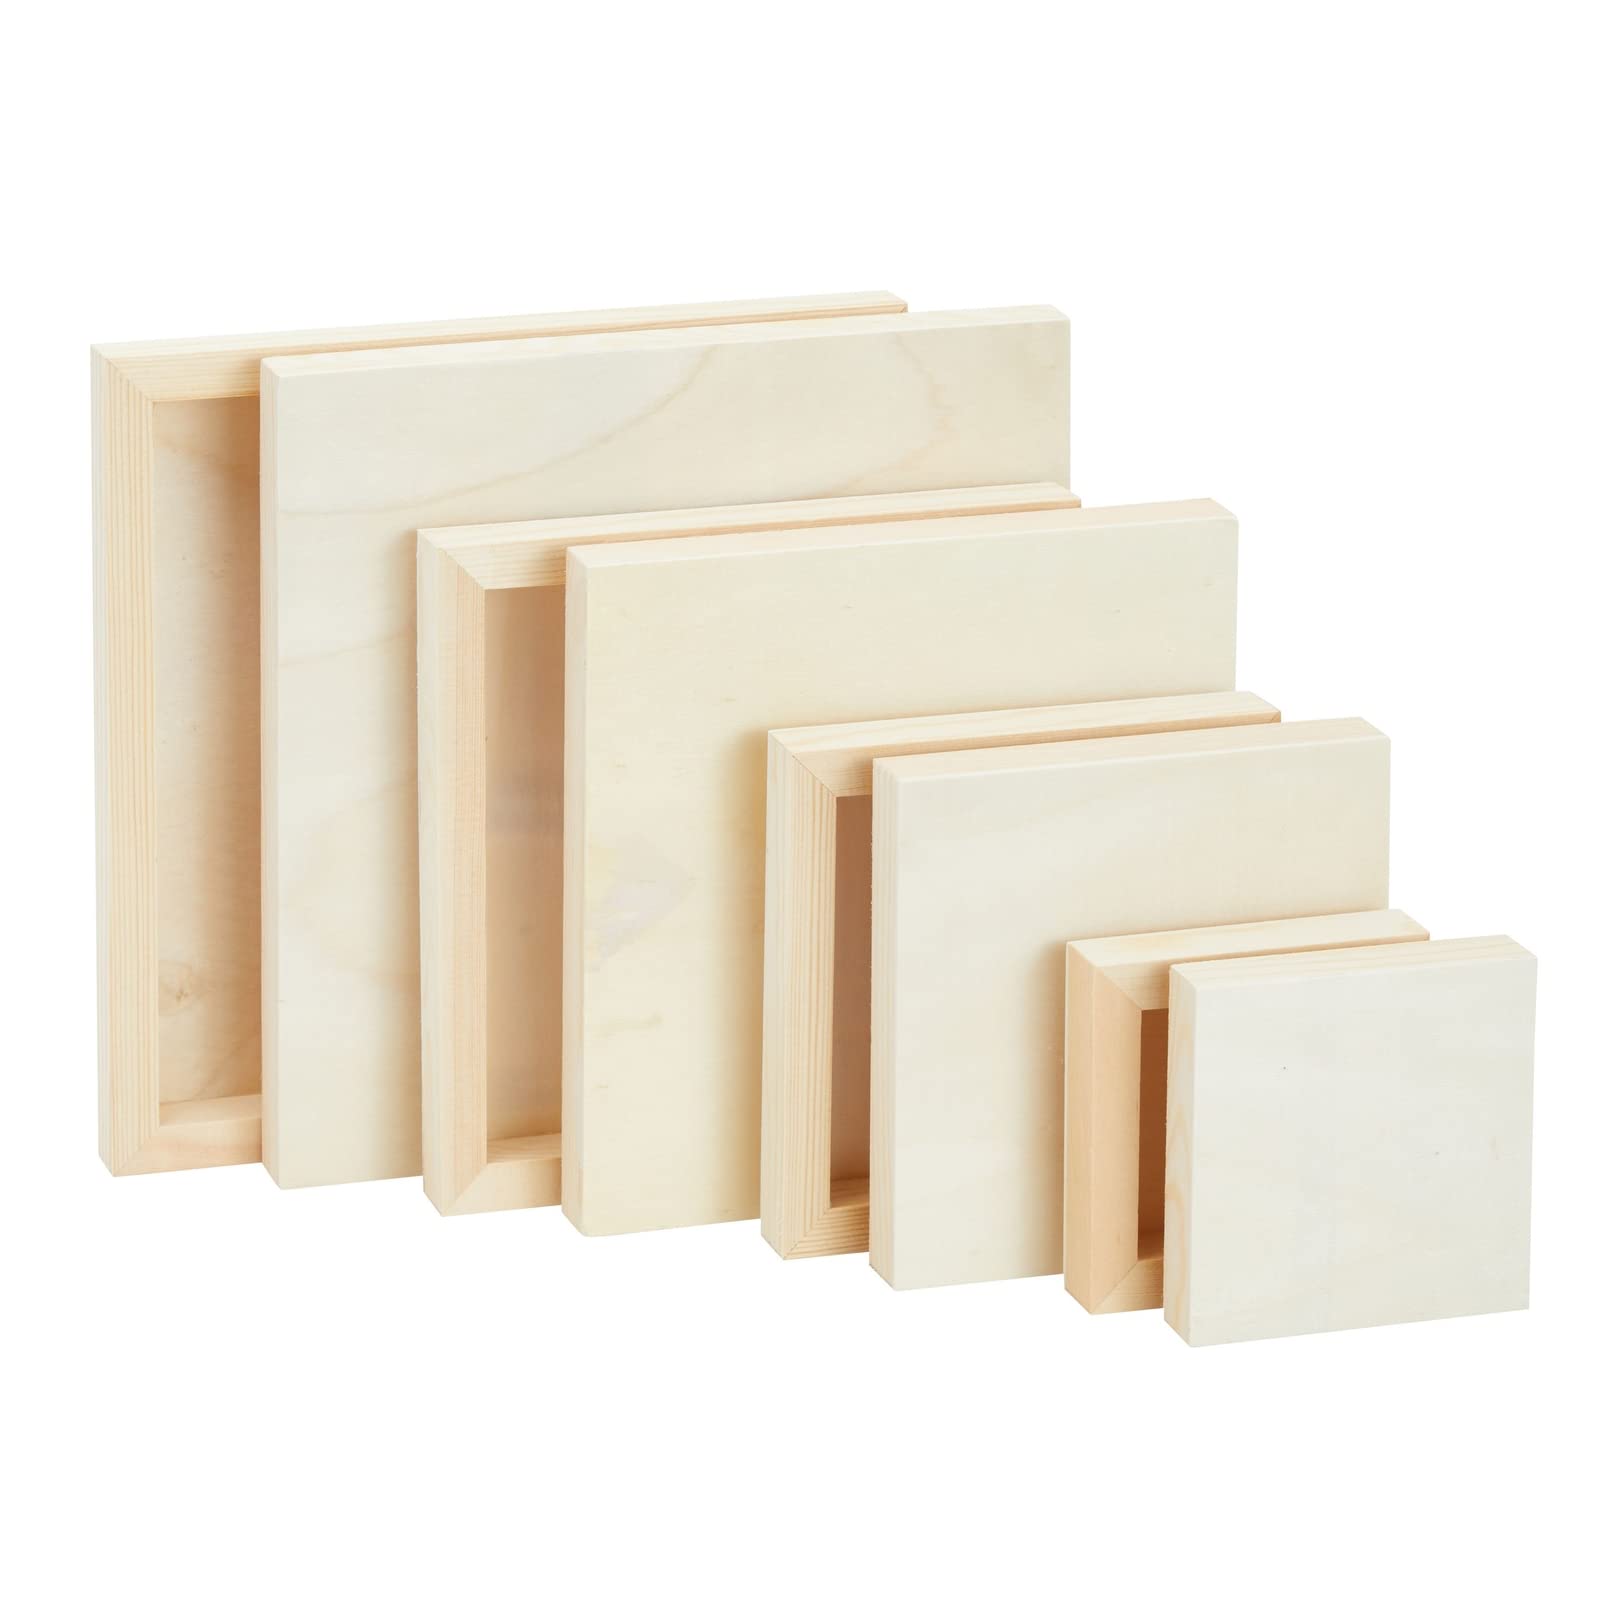 Set of 8 Unfinished Wood Canvas Boards for Painting Wooden Panels